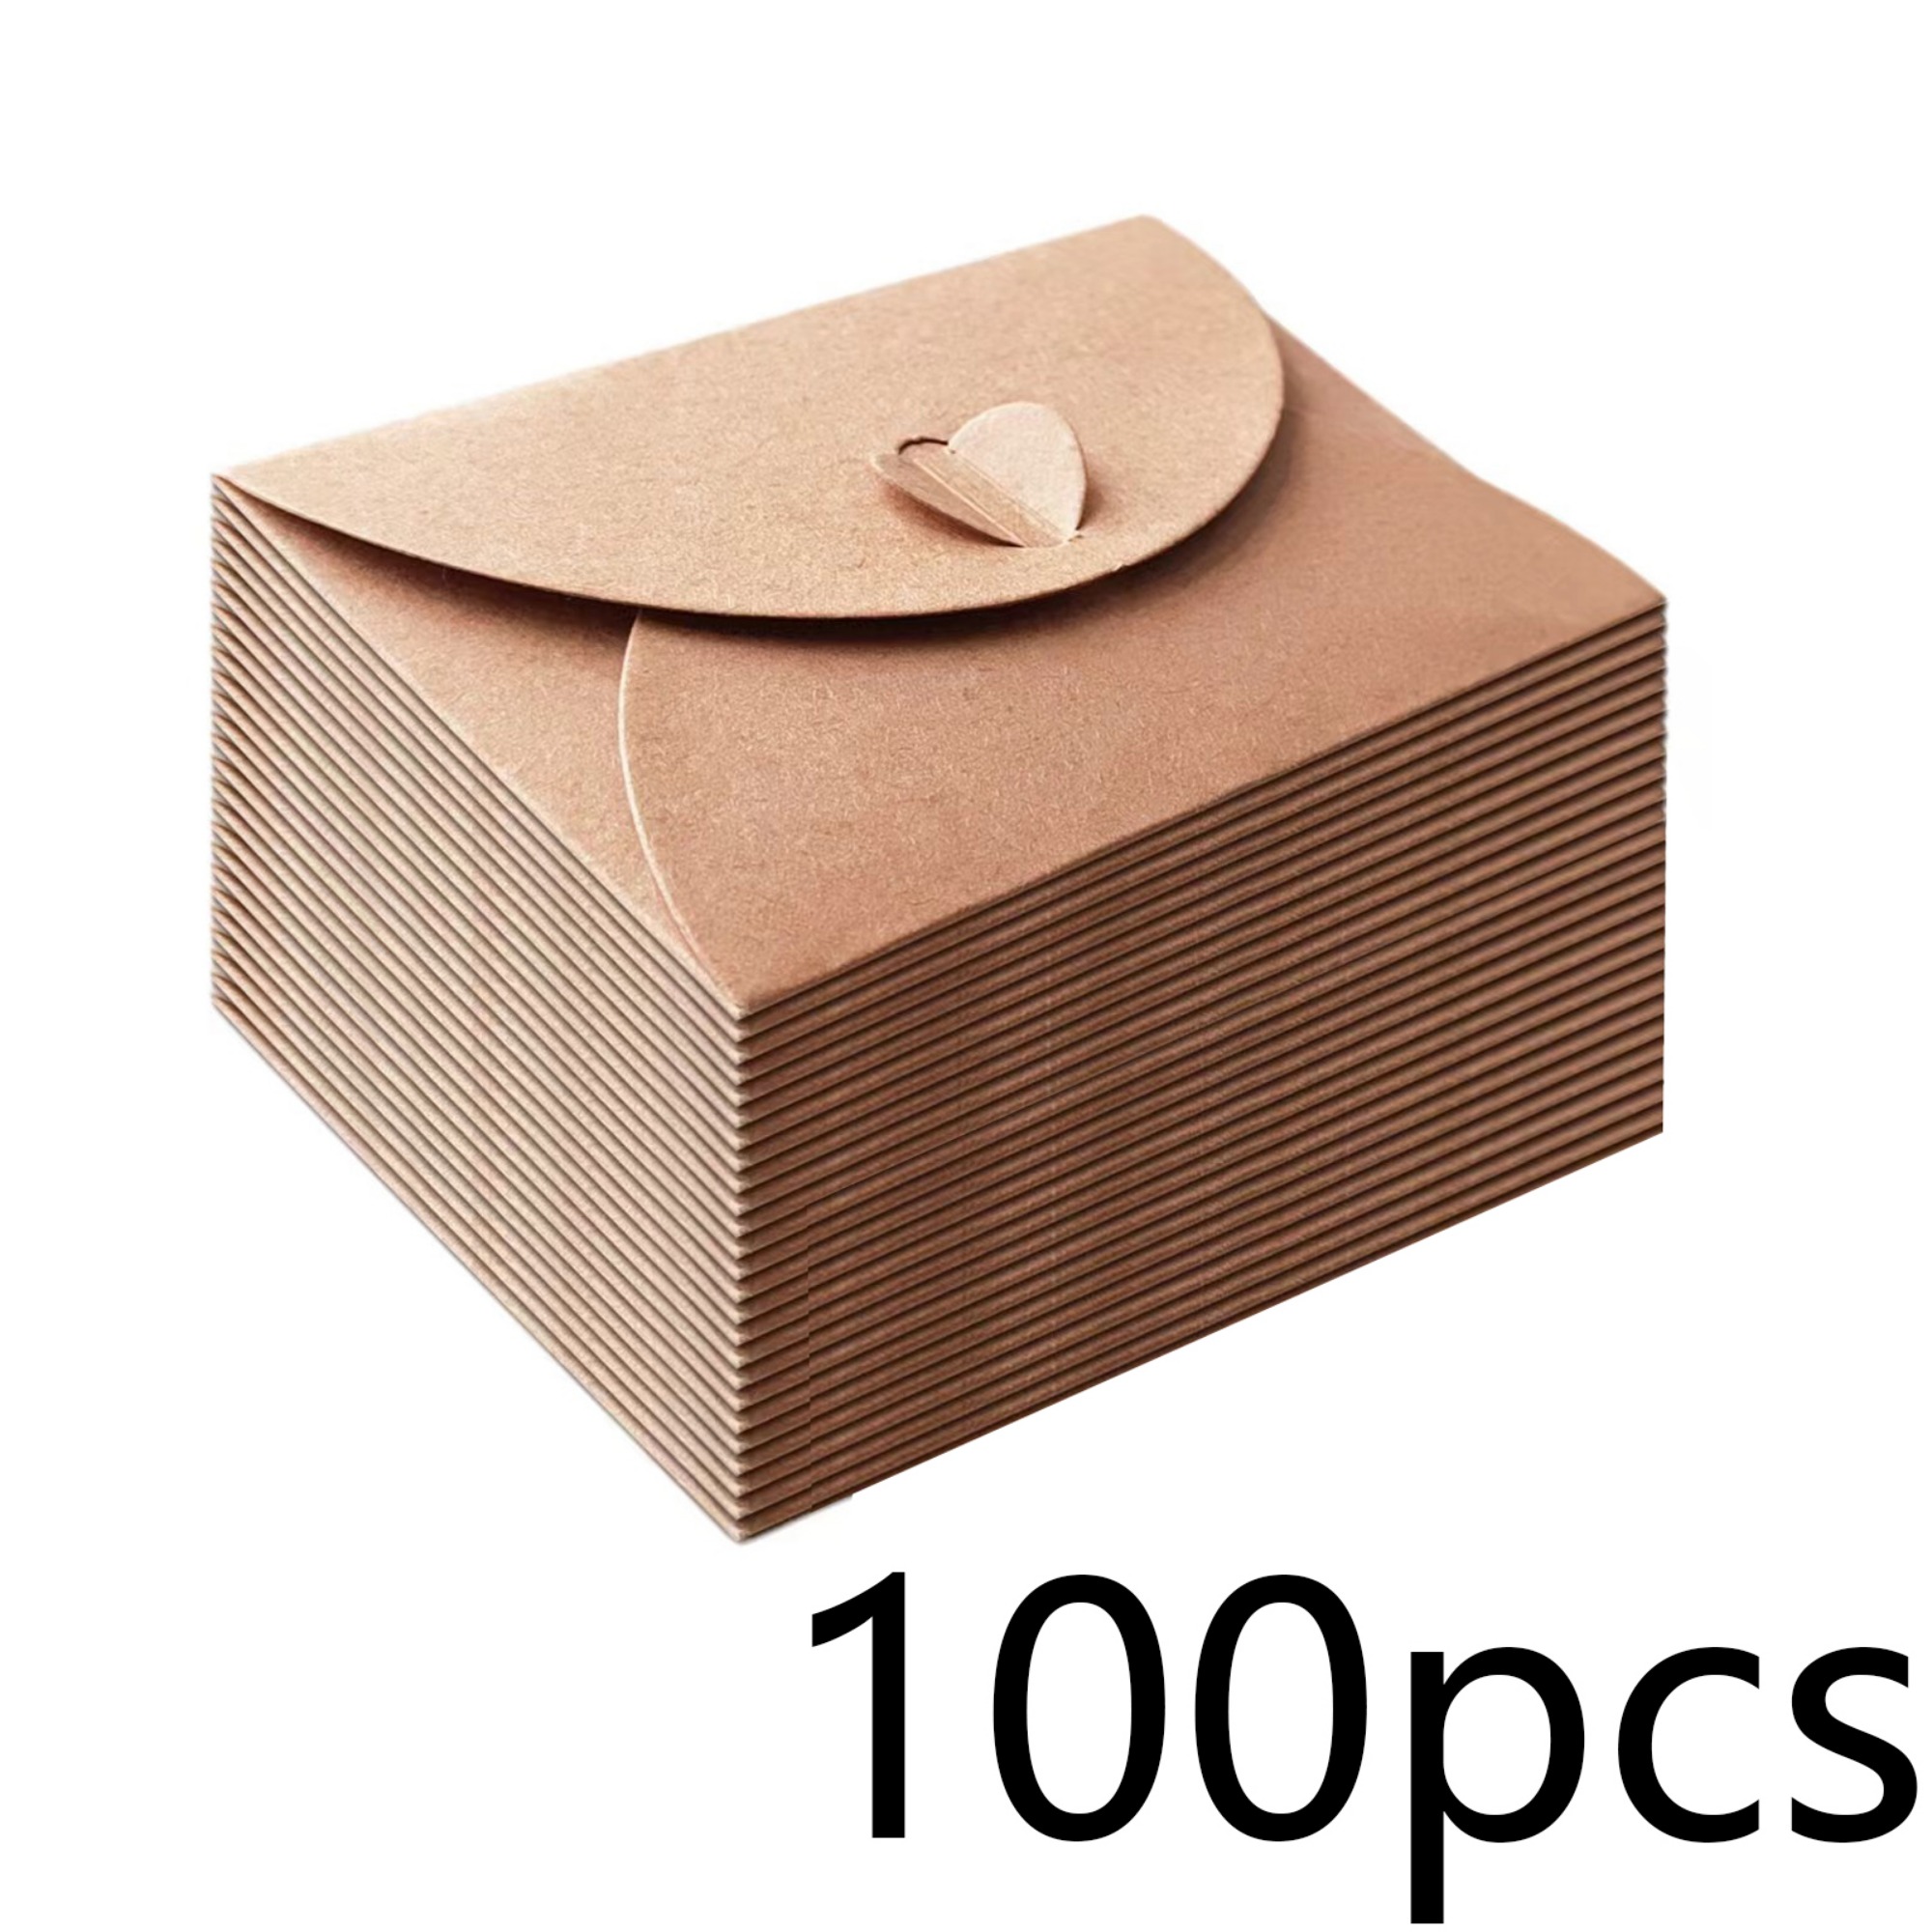 

100-piece Vintage Heart-shaped Kraft Paper Envelopes With Self-seal Closure For Wedding Invitations And Special Occasions